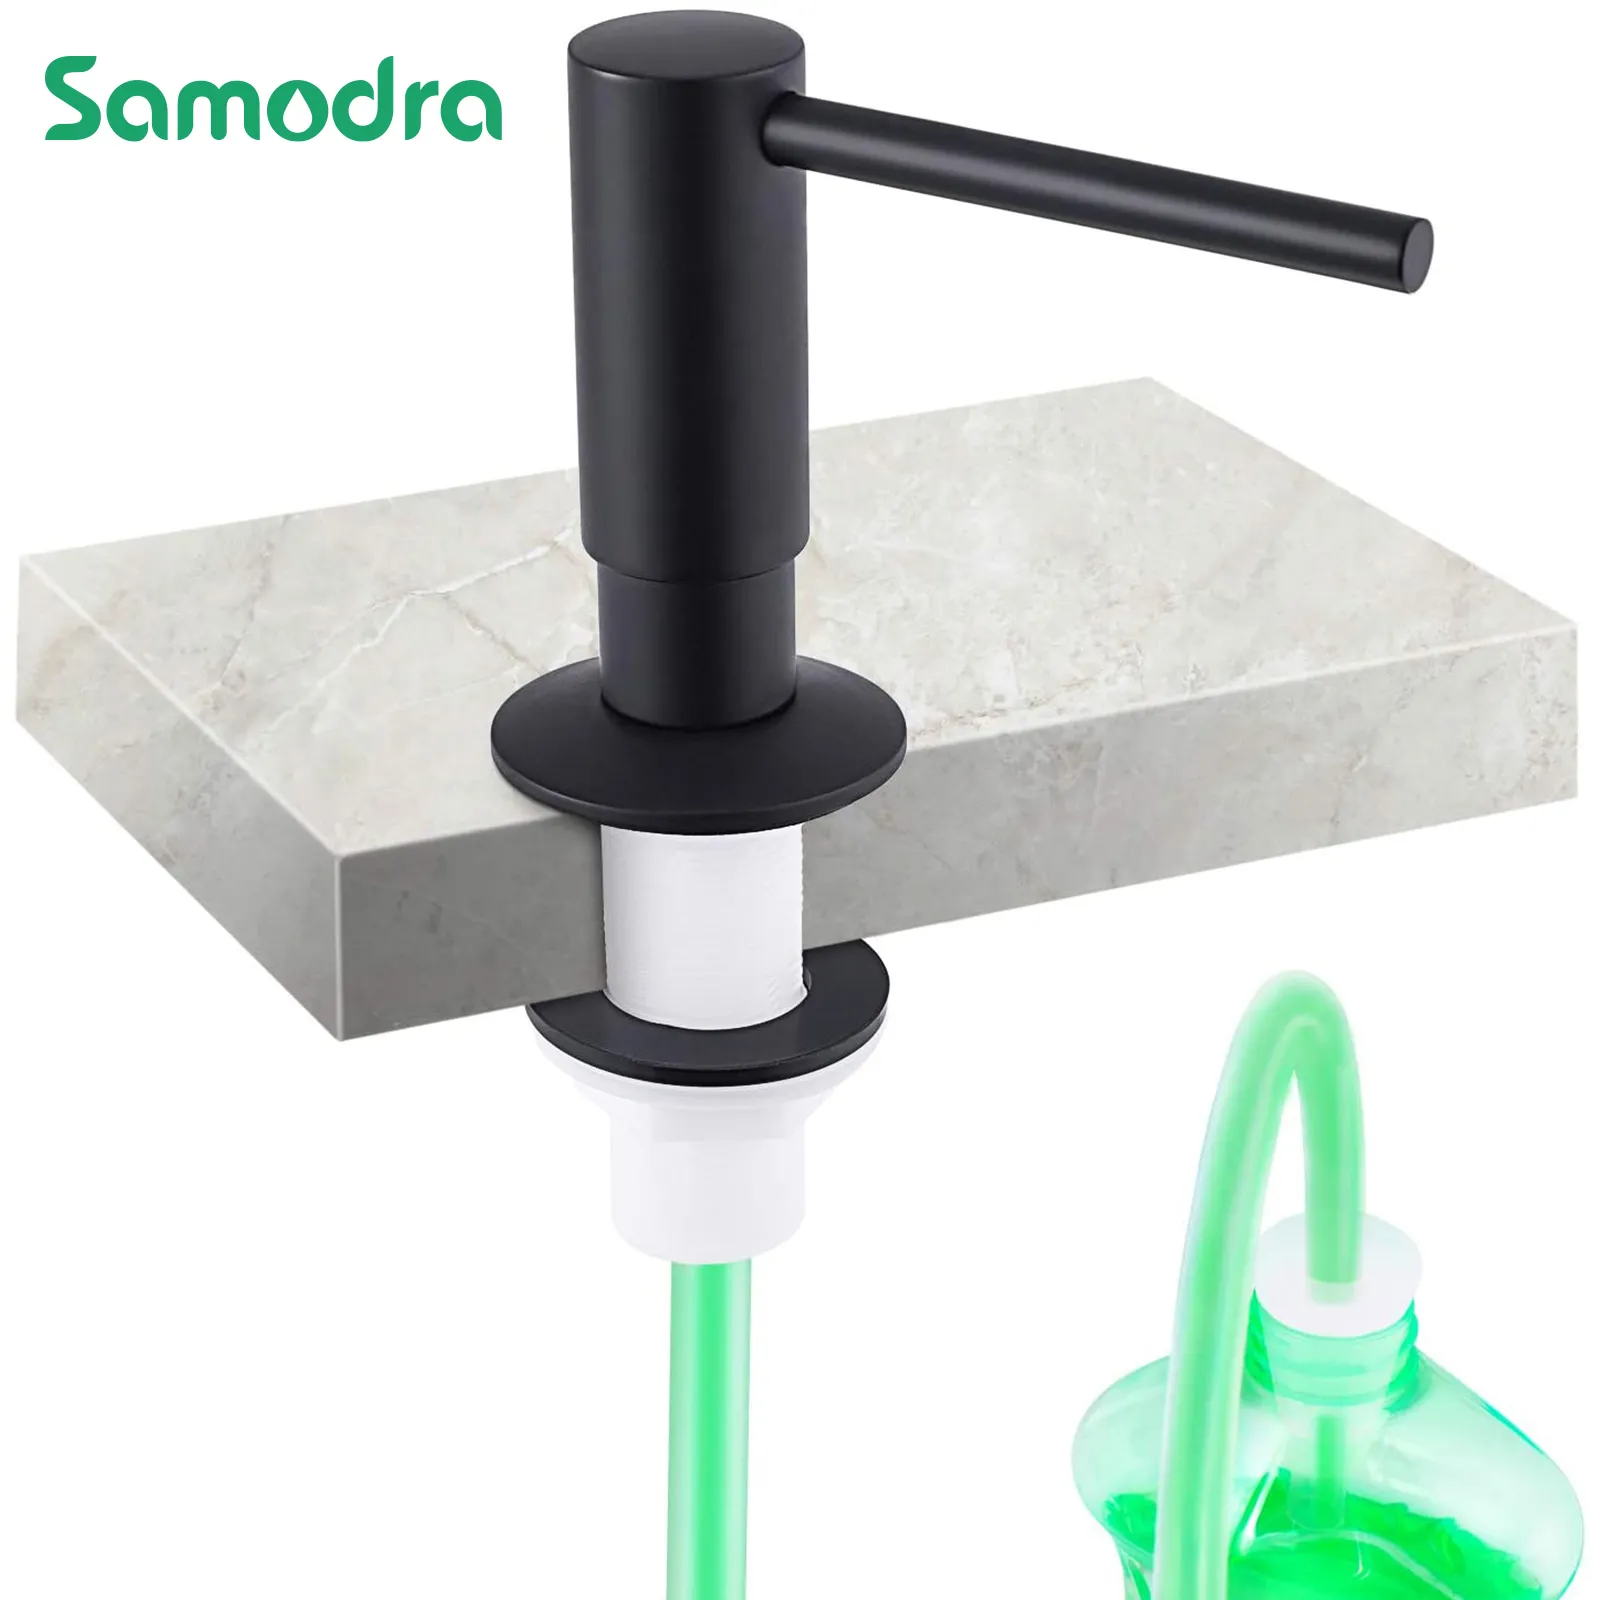 Samodra Brass Pump Soap Dispenser Kit With Brass Pump Head Extension Tube  For Kitchen Sink And Bathroom Accessories Black 221103 From Ning09, $18.1